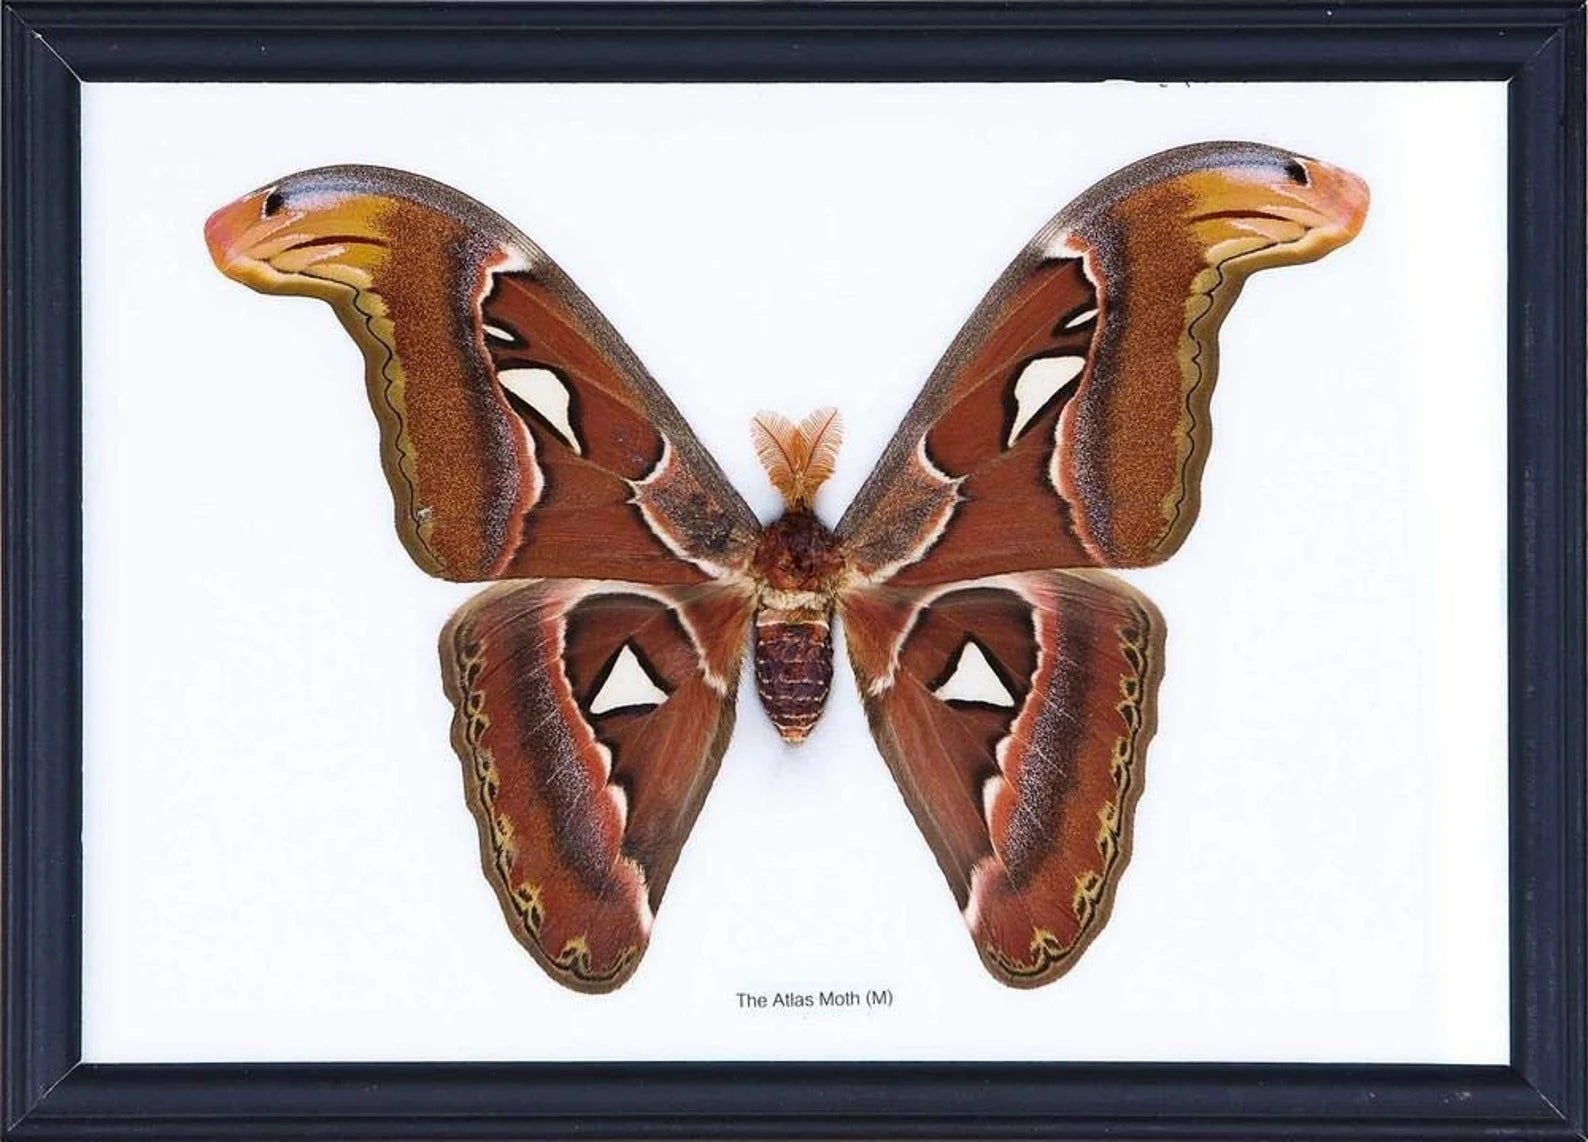 WHOLESALE PACK (6 UNITS) The Giant Atlas Moth (Attacus atlas) The Worlds Largest Giant Moth!  Framed Home Decor 8.5 x 10 inches